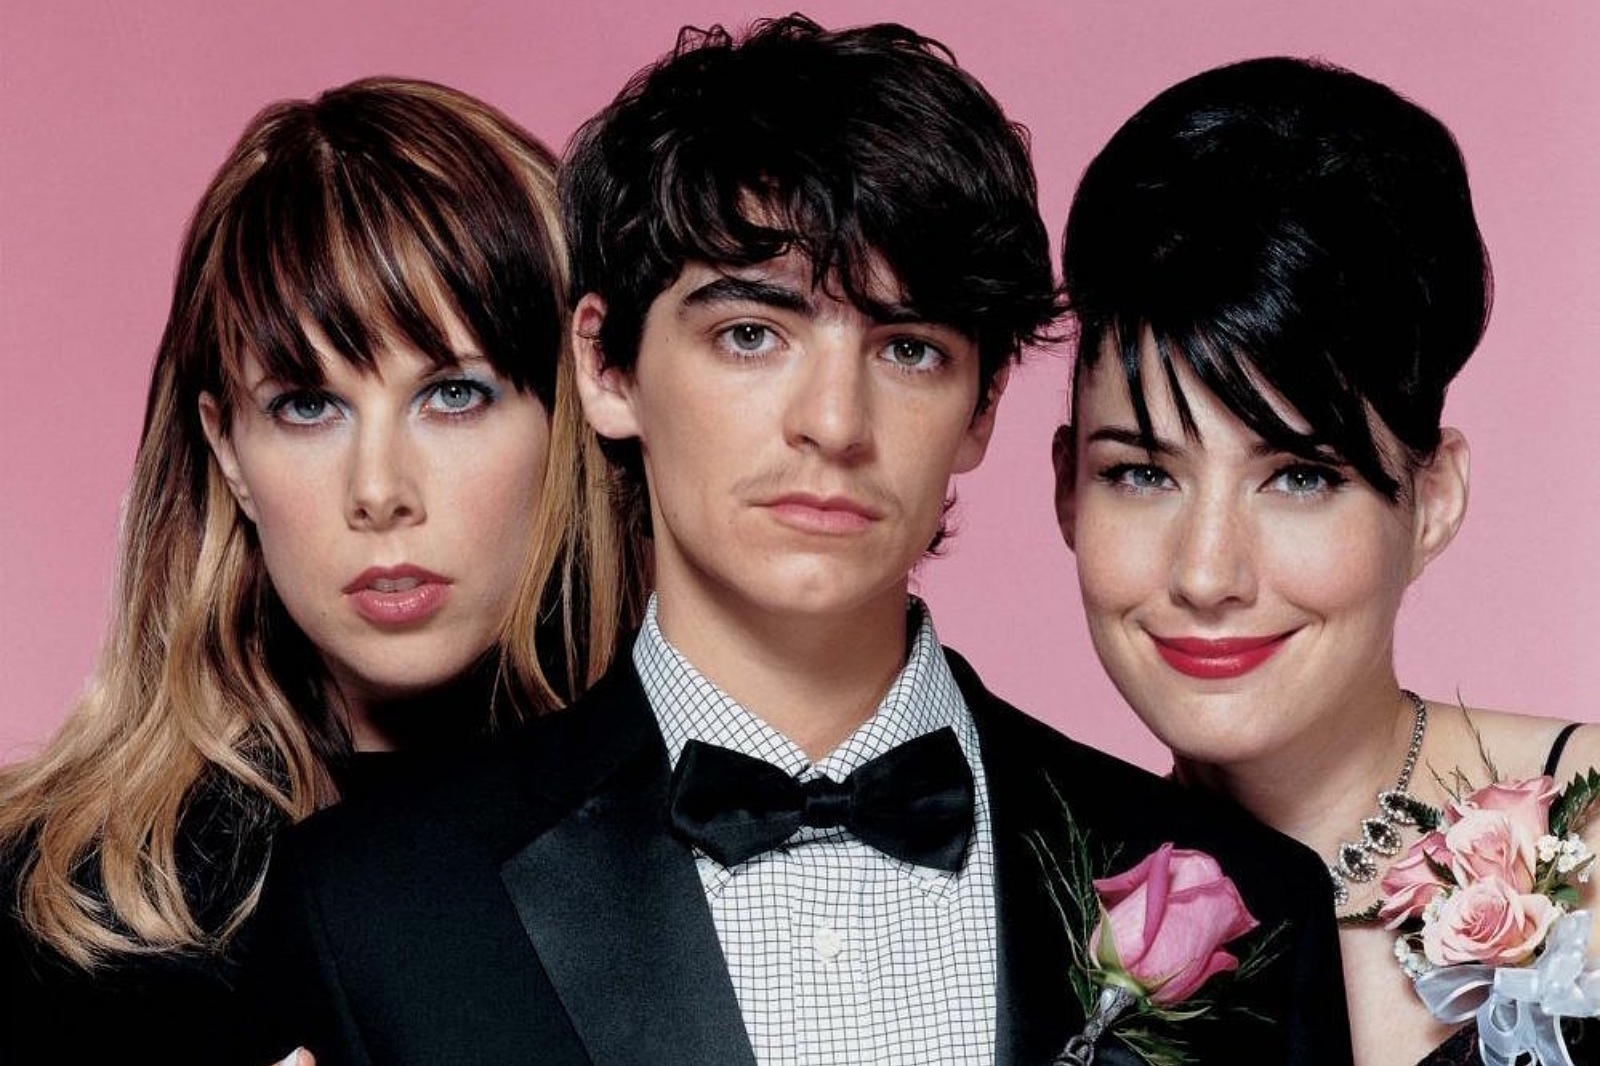 Le Tigre are back together! (well, sort of)